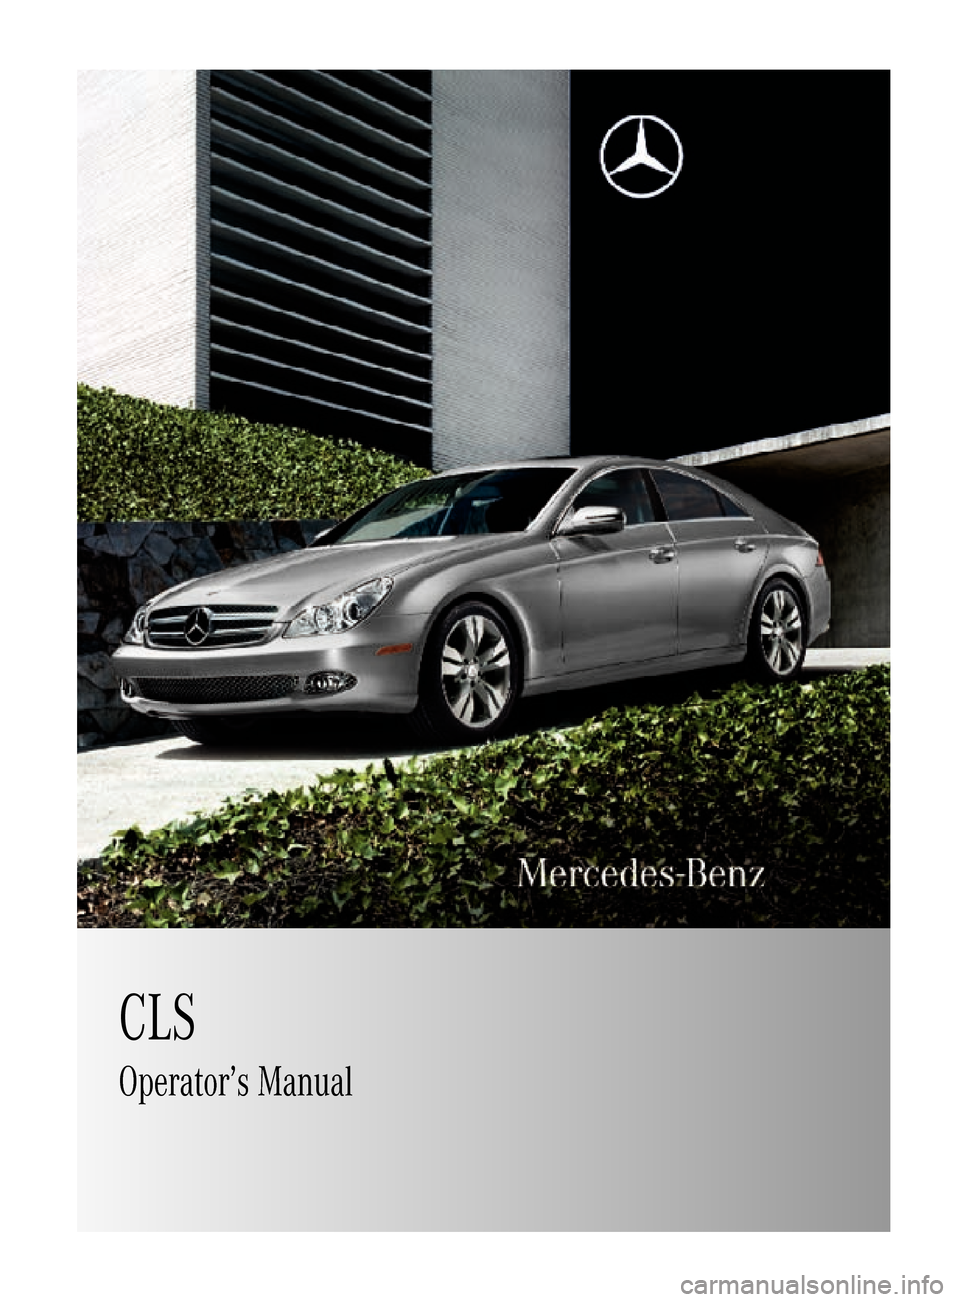 MERCEDES-BENZ CLS63AMG 2010 W219 Owners Manual CLS
Operator’s Manual
219_AKB; 4; 54, en-US
d2ureepe,Version: 2.11.8.1 2009-05-11T16:21:02+02:00 - Seite 1    